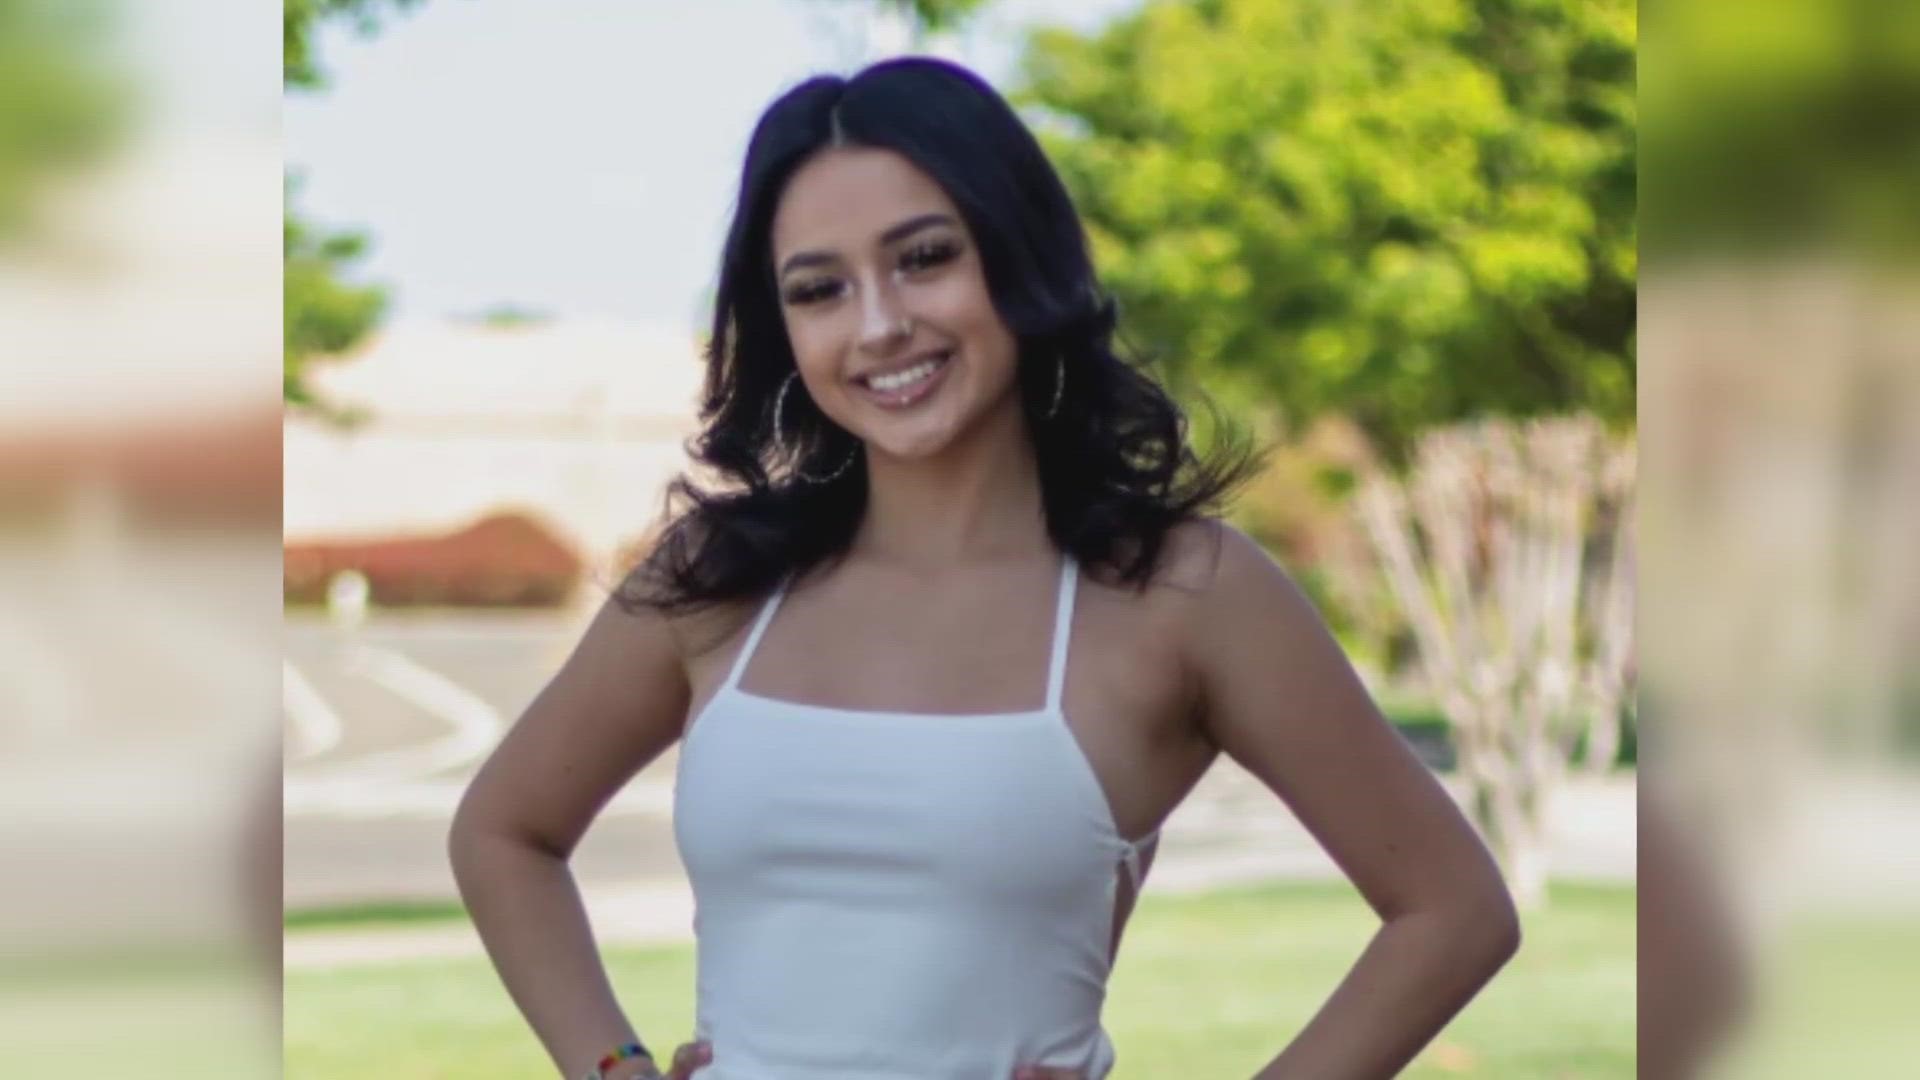 Saraiah Acosta was identified as the 18-year-old who was killed in Rancho Cordova, Wednesday. Her family remembers her as the life of the party.